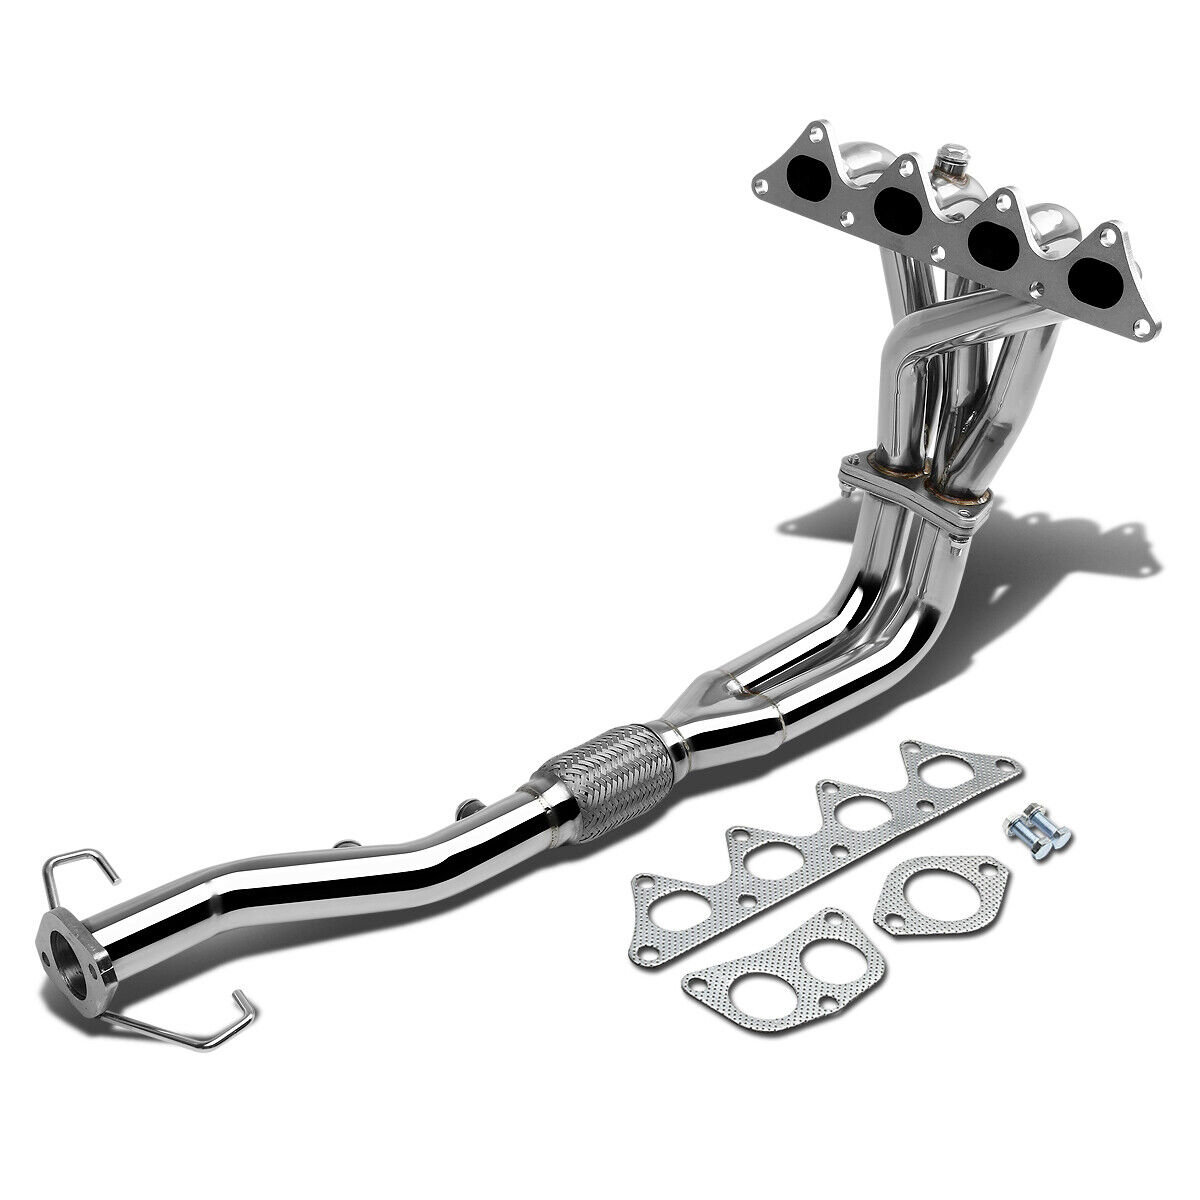 Fit 02-07 Lancer 4G94 2.0 4-2-1 Stainless Steel Racing Header Manifold Exhaust